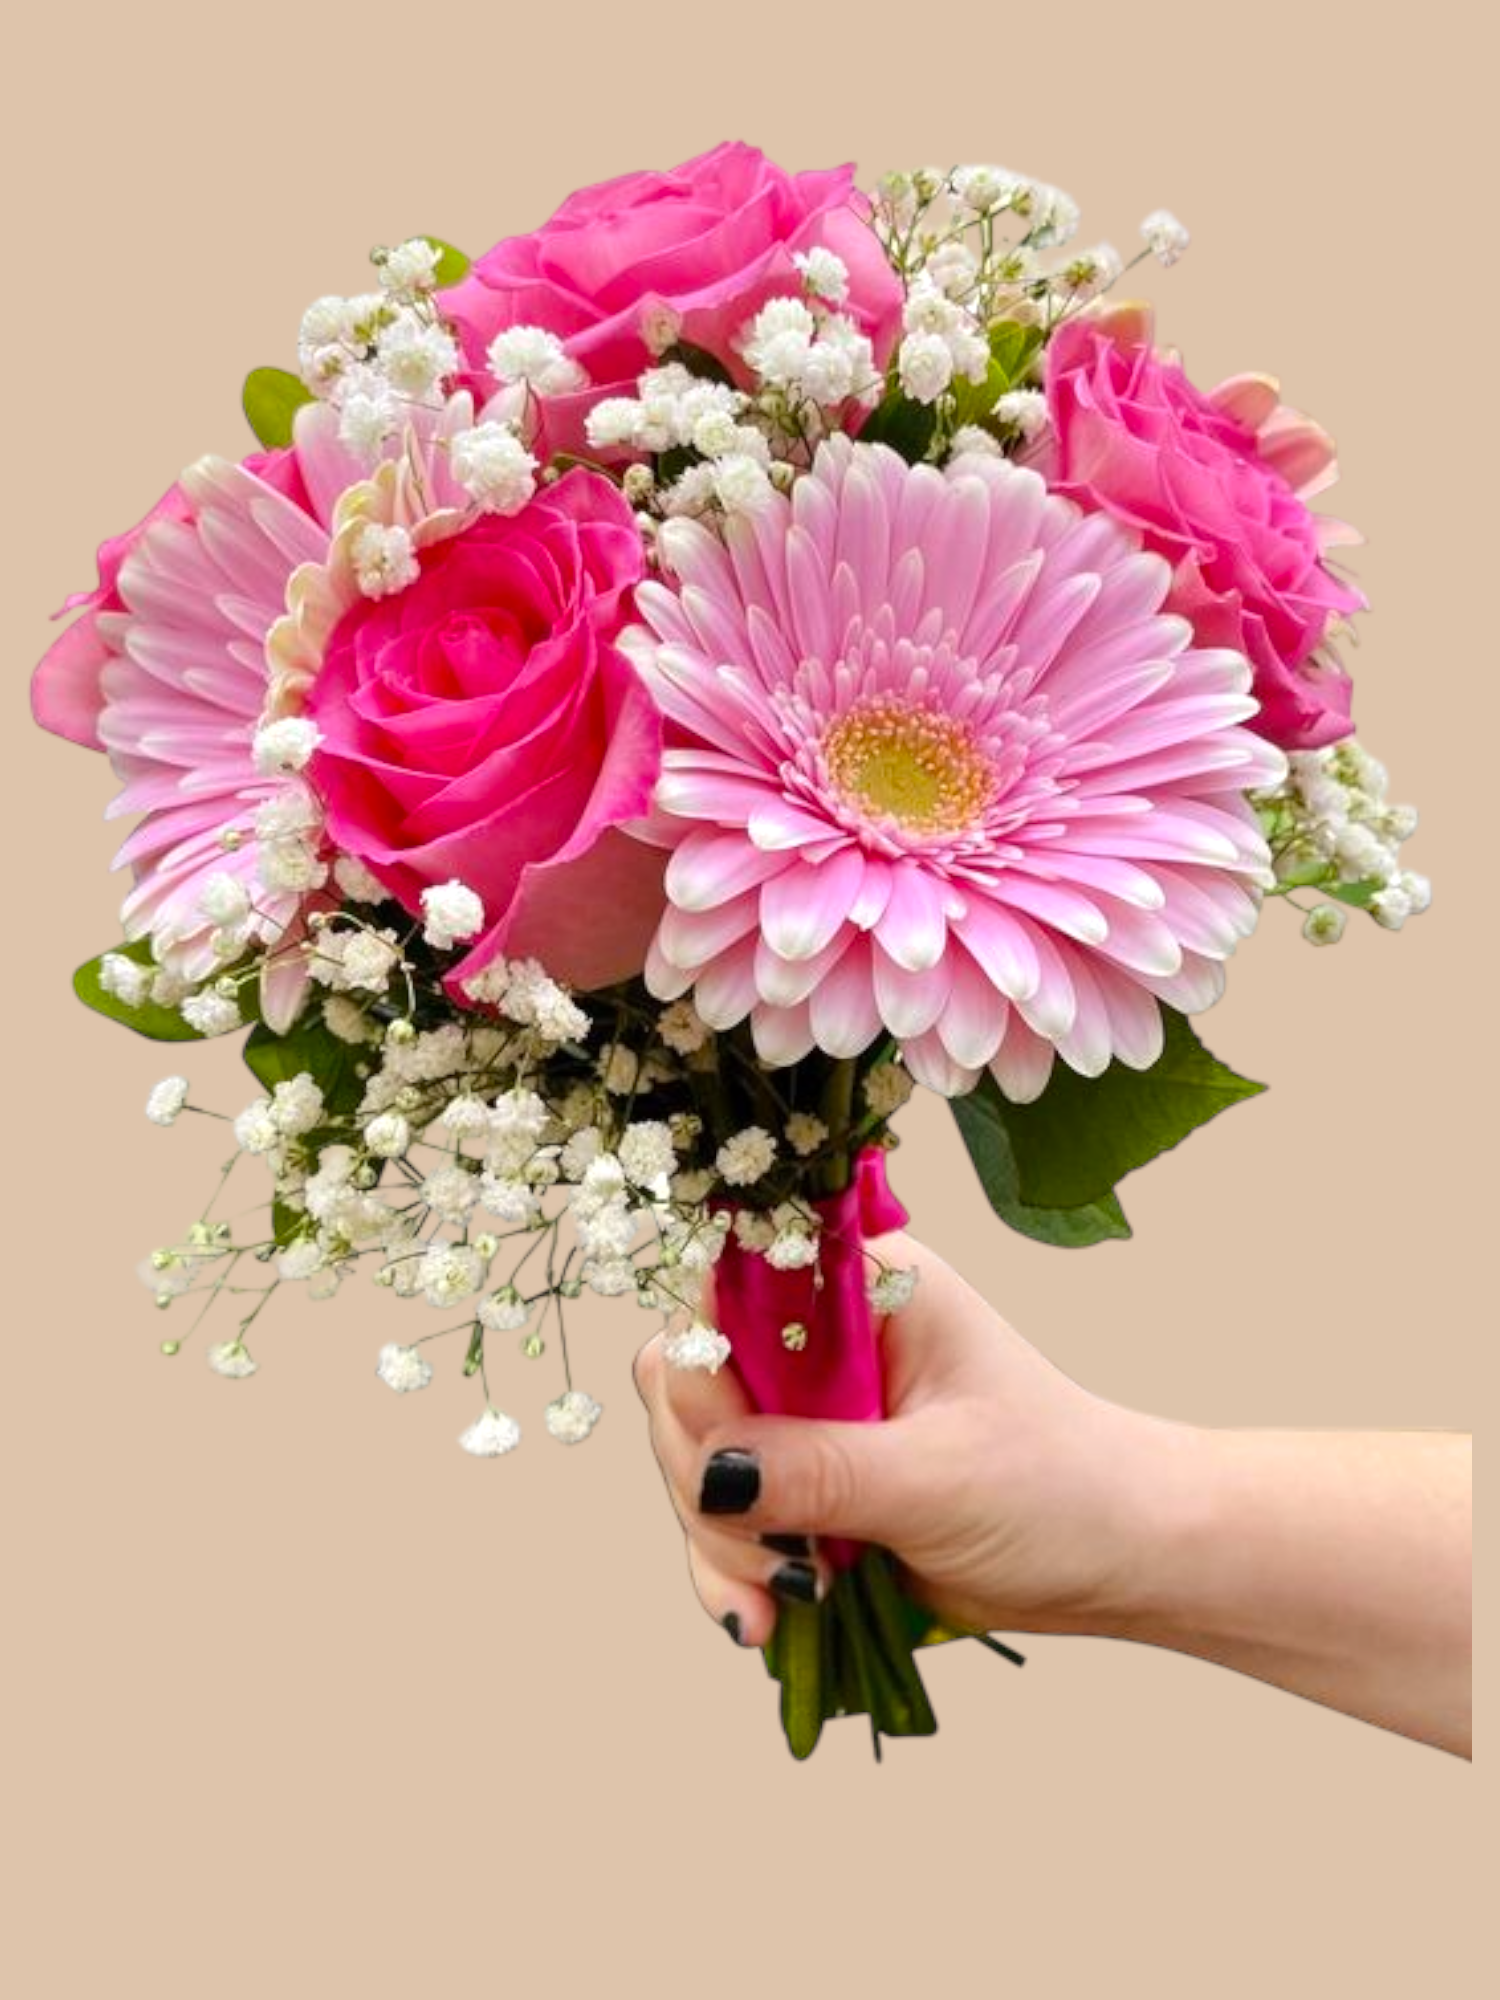 Together Forever hand bouquet delivery in Dubai